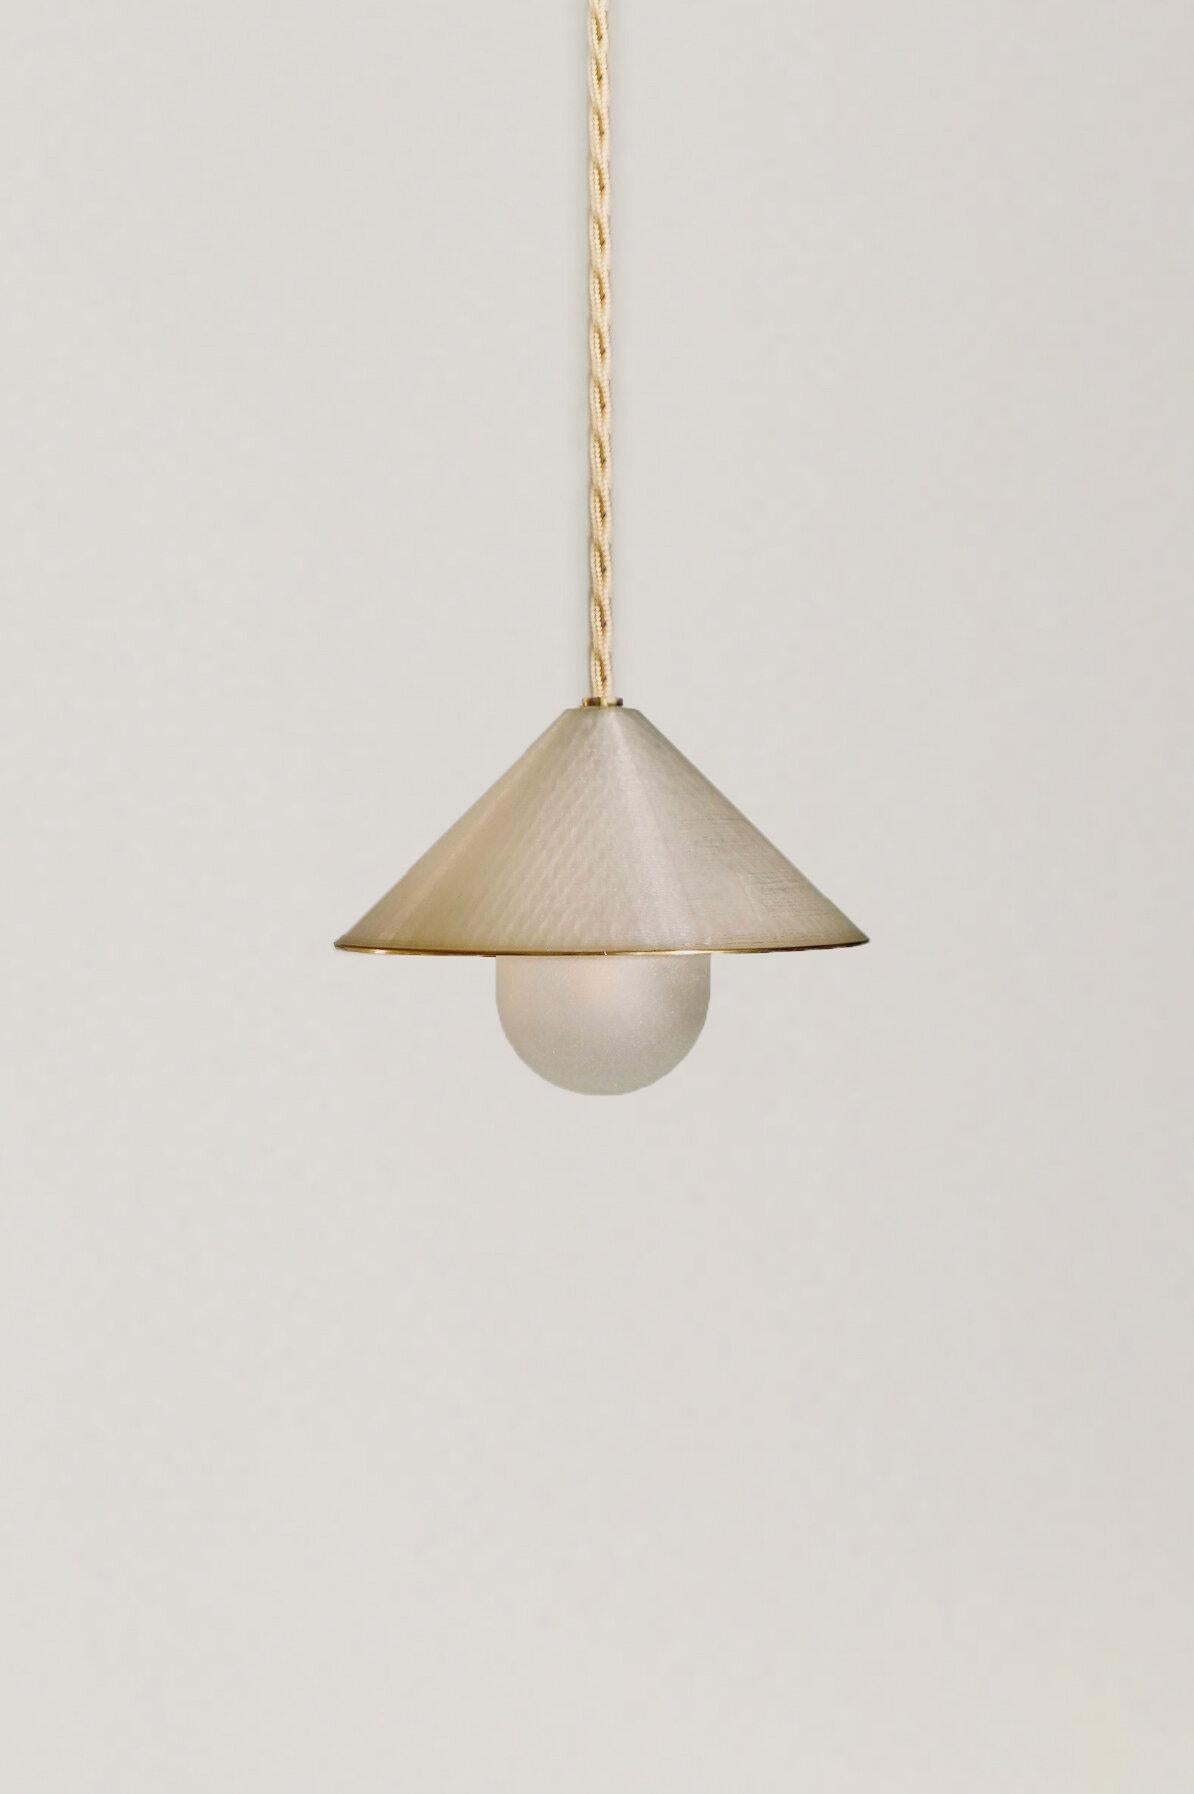 Alba top pendant by Contain
Dimensions: D 15x H 100 cm (custom leght)
Materials: Brass, 3D printed PLA structure and optical lens.
Also available in different finishes.

All our lamps can be wired according to each country. If sold to the USA